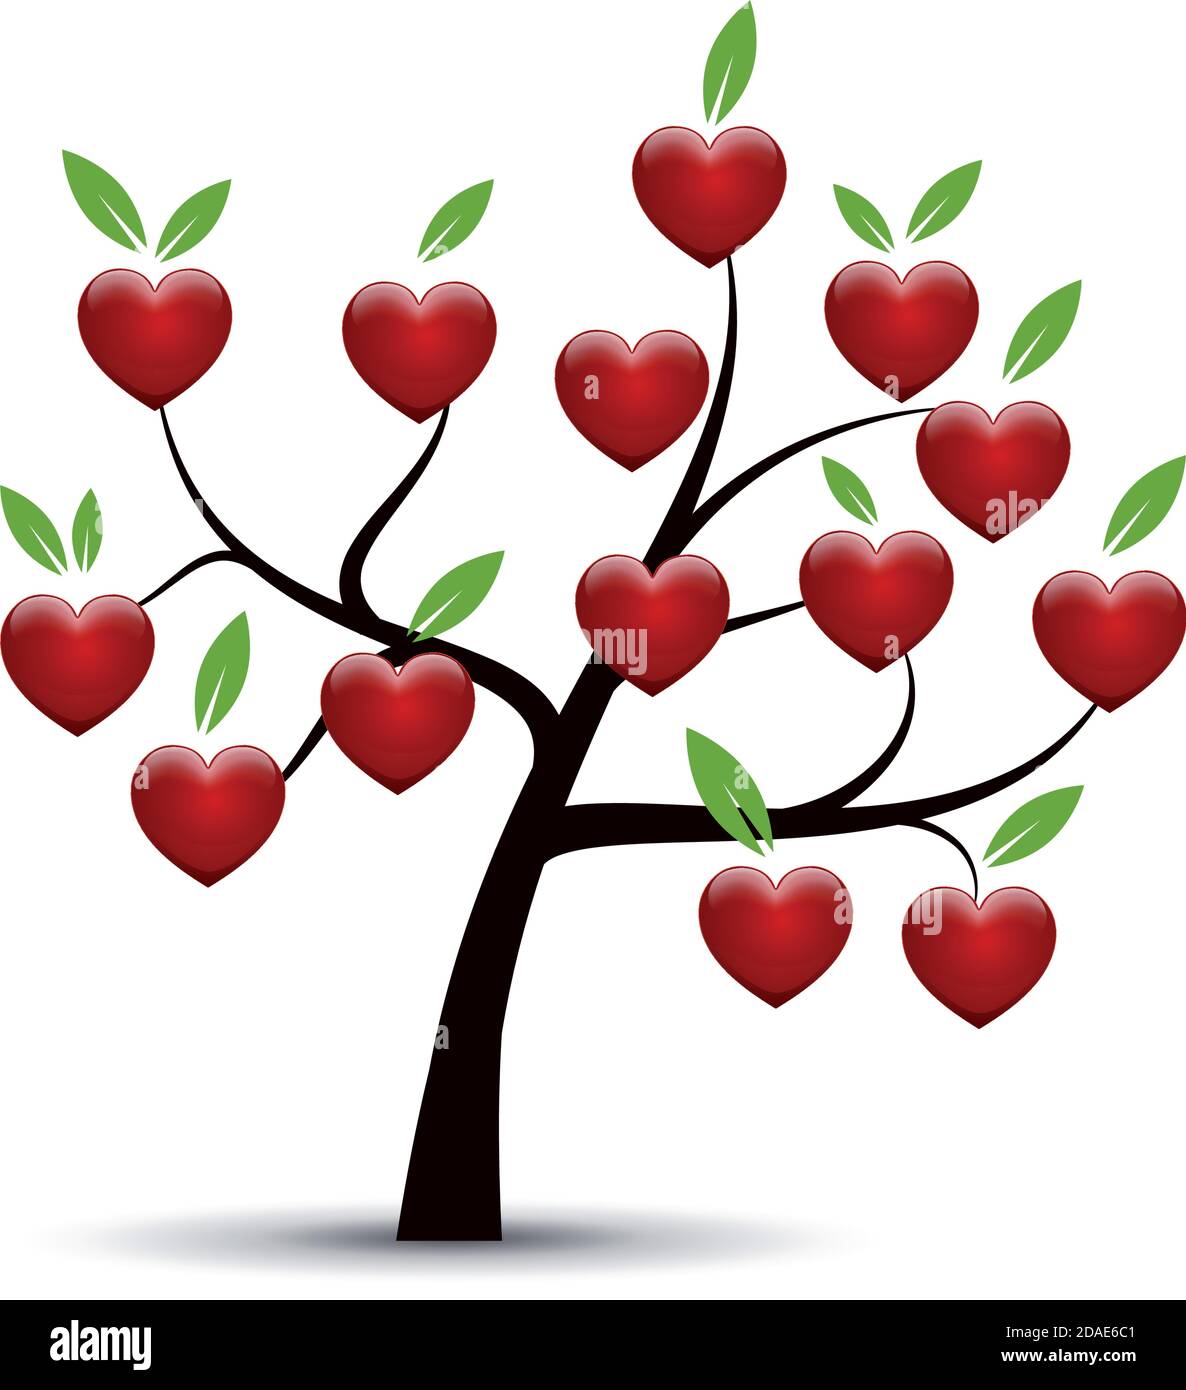 tree of love and life, vector illustration Stock Vector